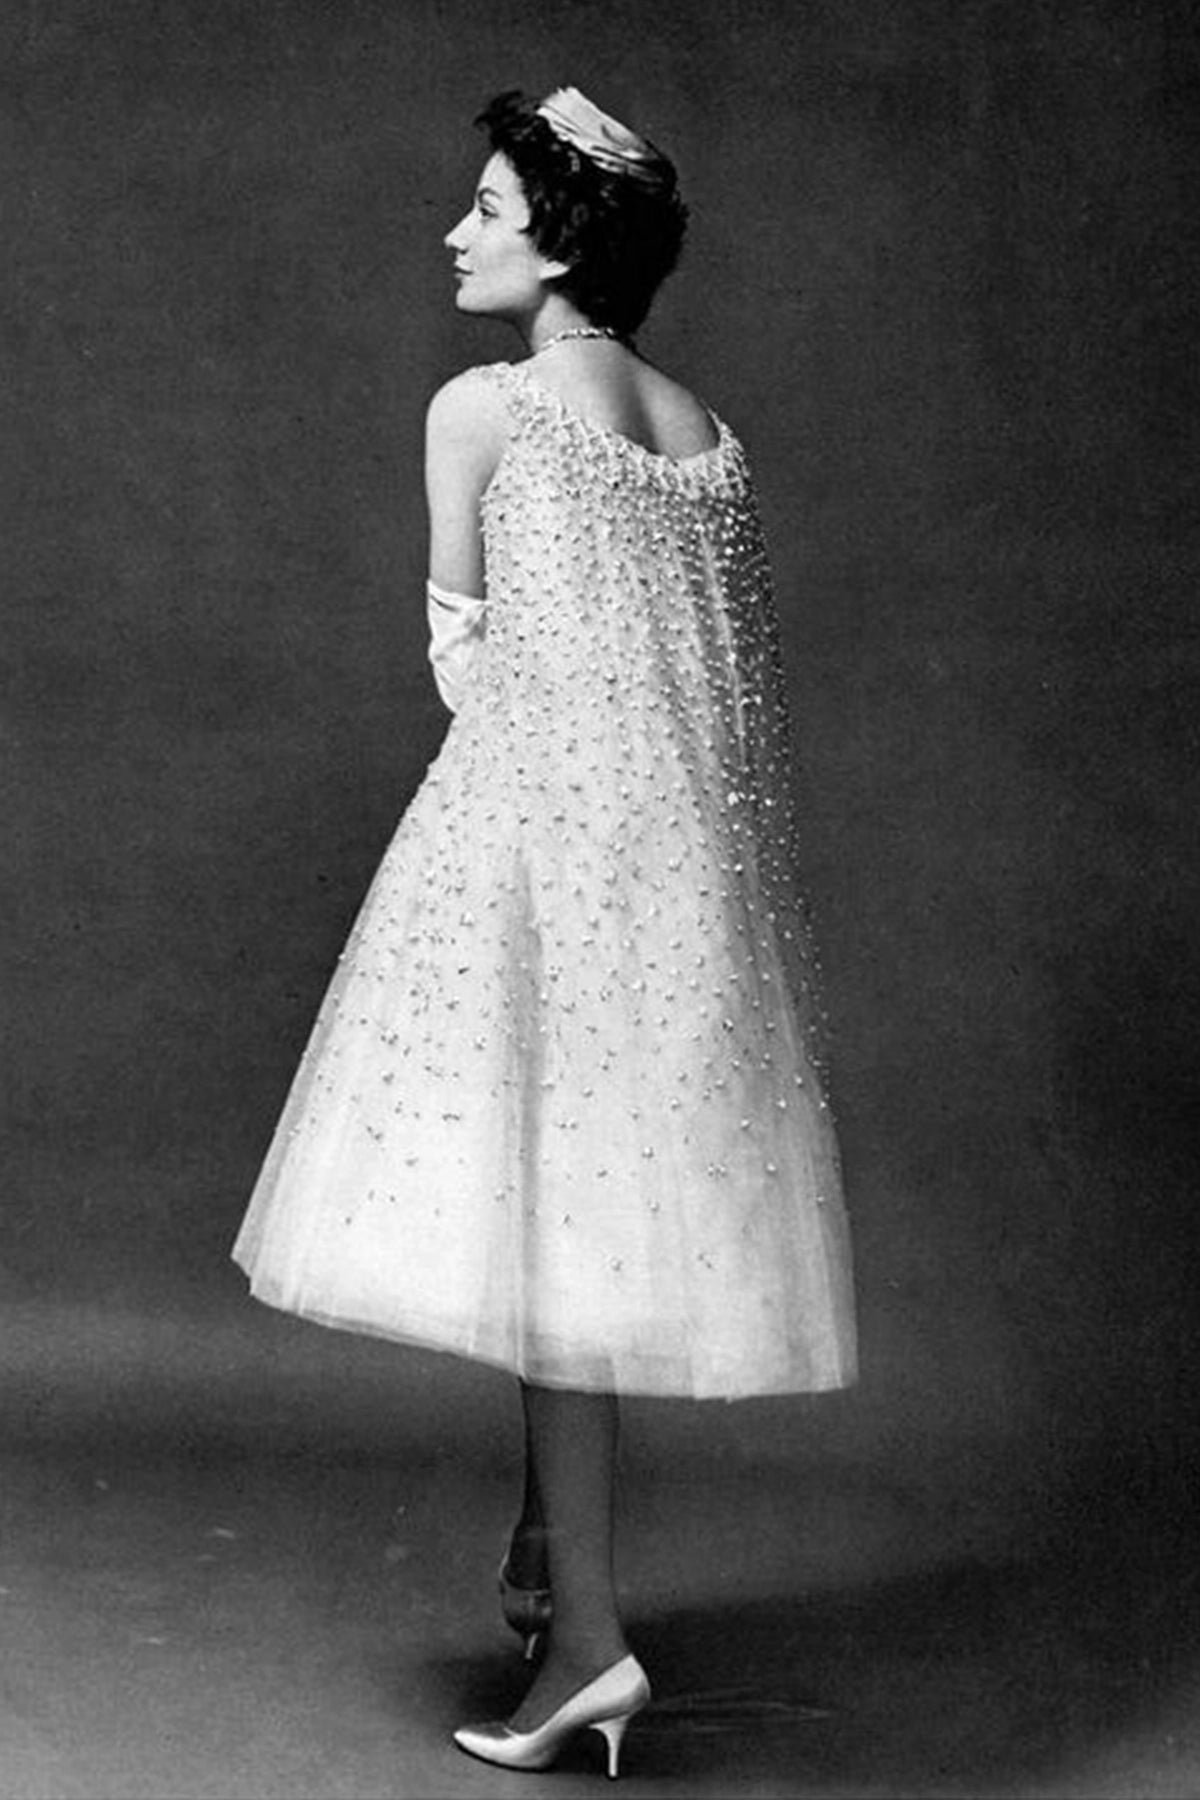 Hélène Delrieu in white silk and tulle dress embroidered with pearls by (YSL) Christian Dior, photo by Georges Saad, 1958